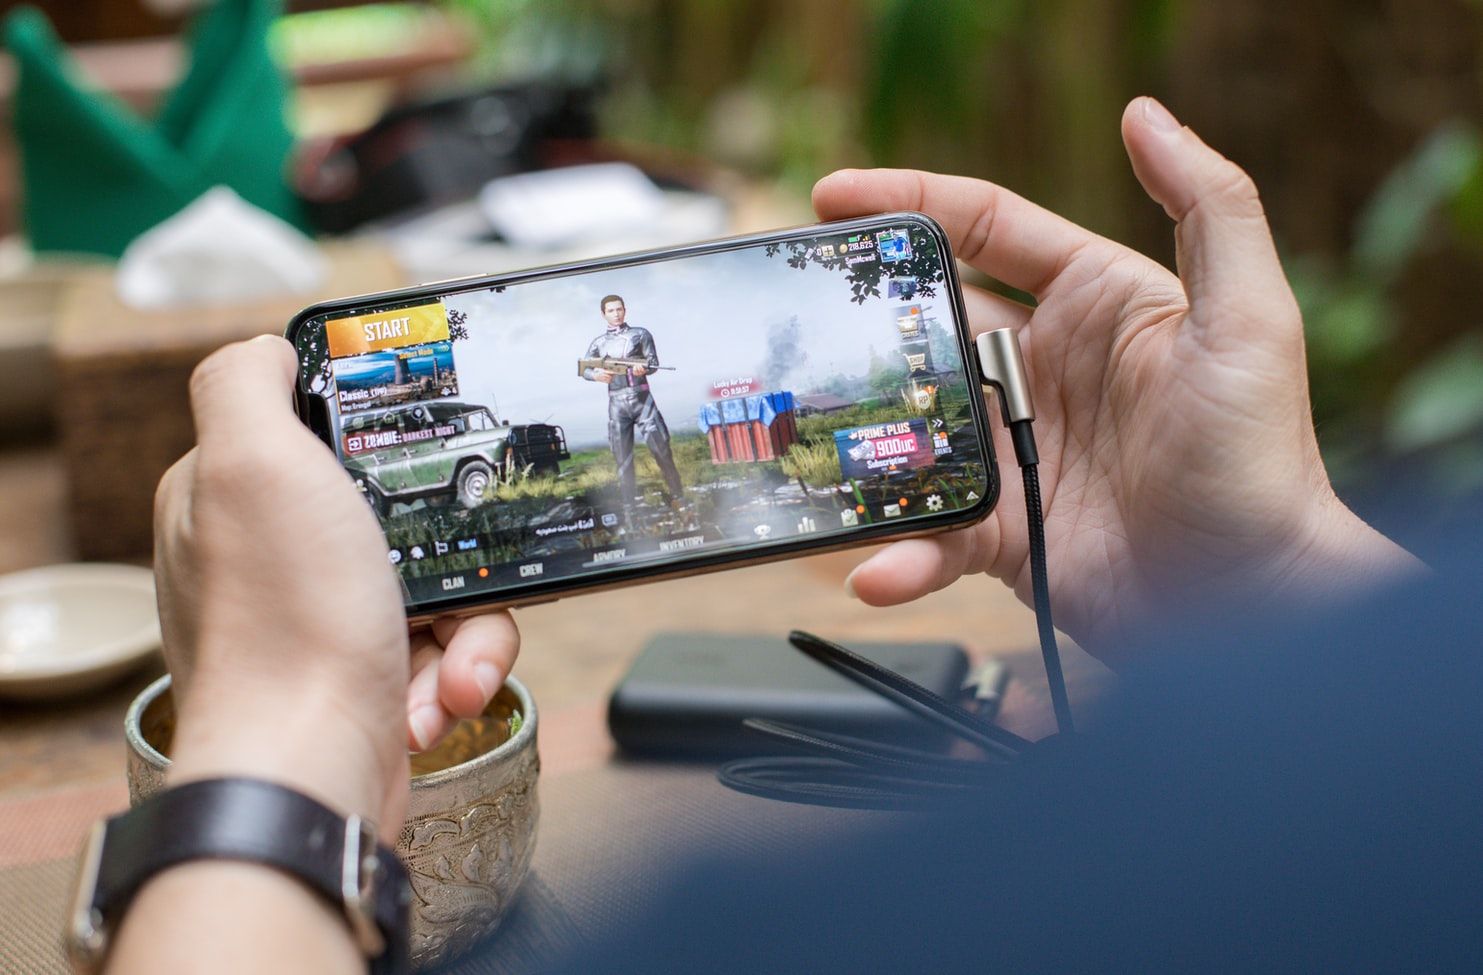  A person is holding a black gaming phone with a 6-inch Full HD display, an octa-core processor, 4GB of RAM, and a 4000mAh battery while playing a game.